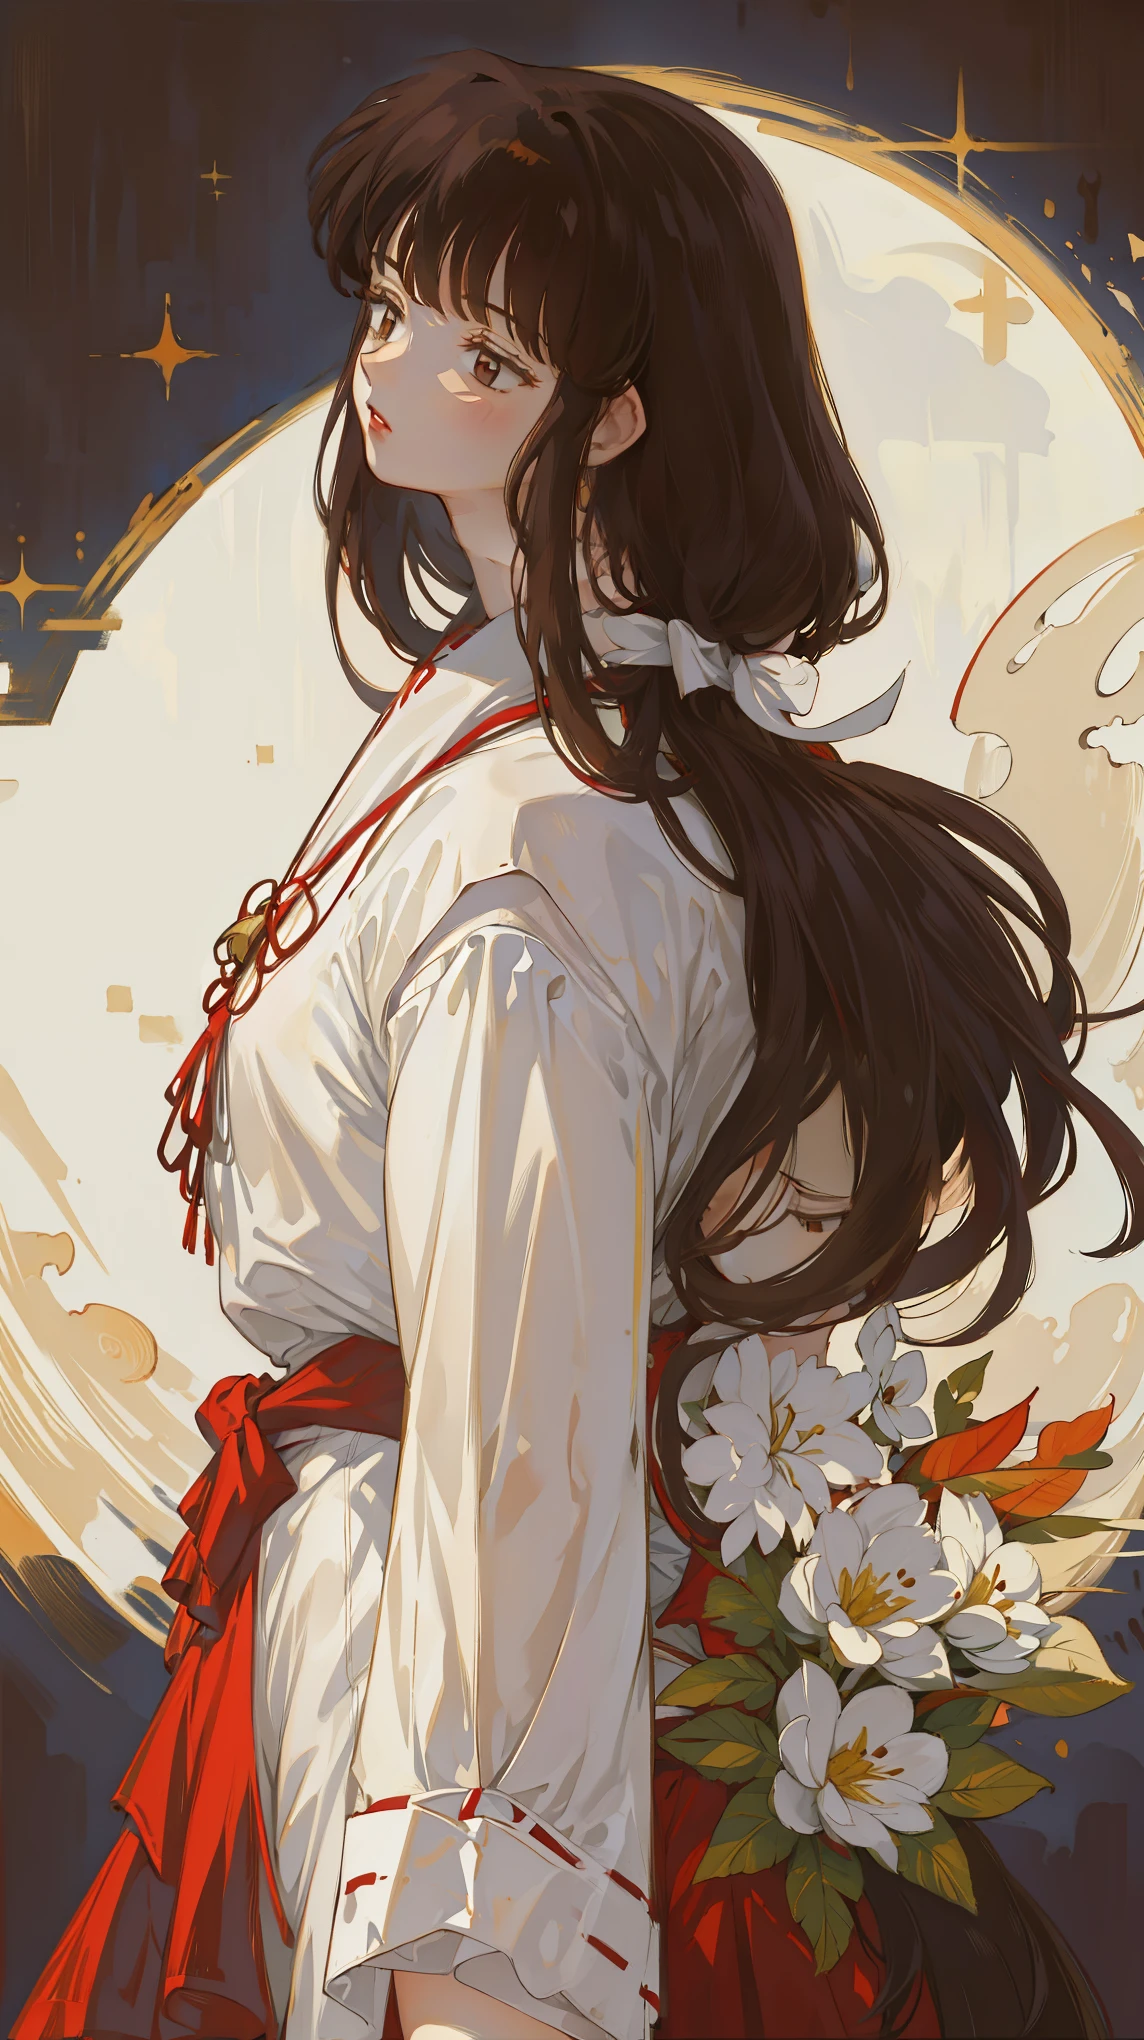 Painted above chest, Honey, (1 girl), ((独奏)), ((Solitary)), Lovely, White skin, By Bangs, Platycodon grandiflorum, Skinny, Side Chain, (Black hair), blunt_hair, Red_Apart from,(Miko costume), elegant,Japanese traditional clothing, Brown eyes, Brown Eyeshadow, (red lips), masterpiece, high quality